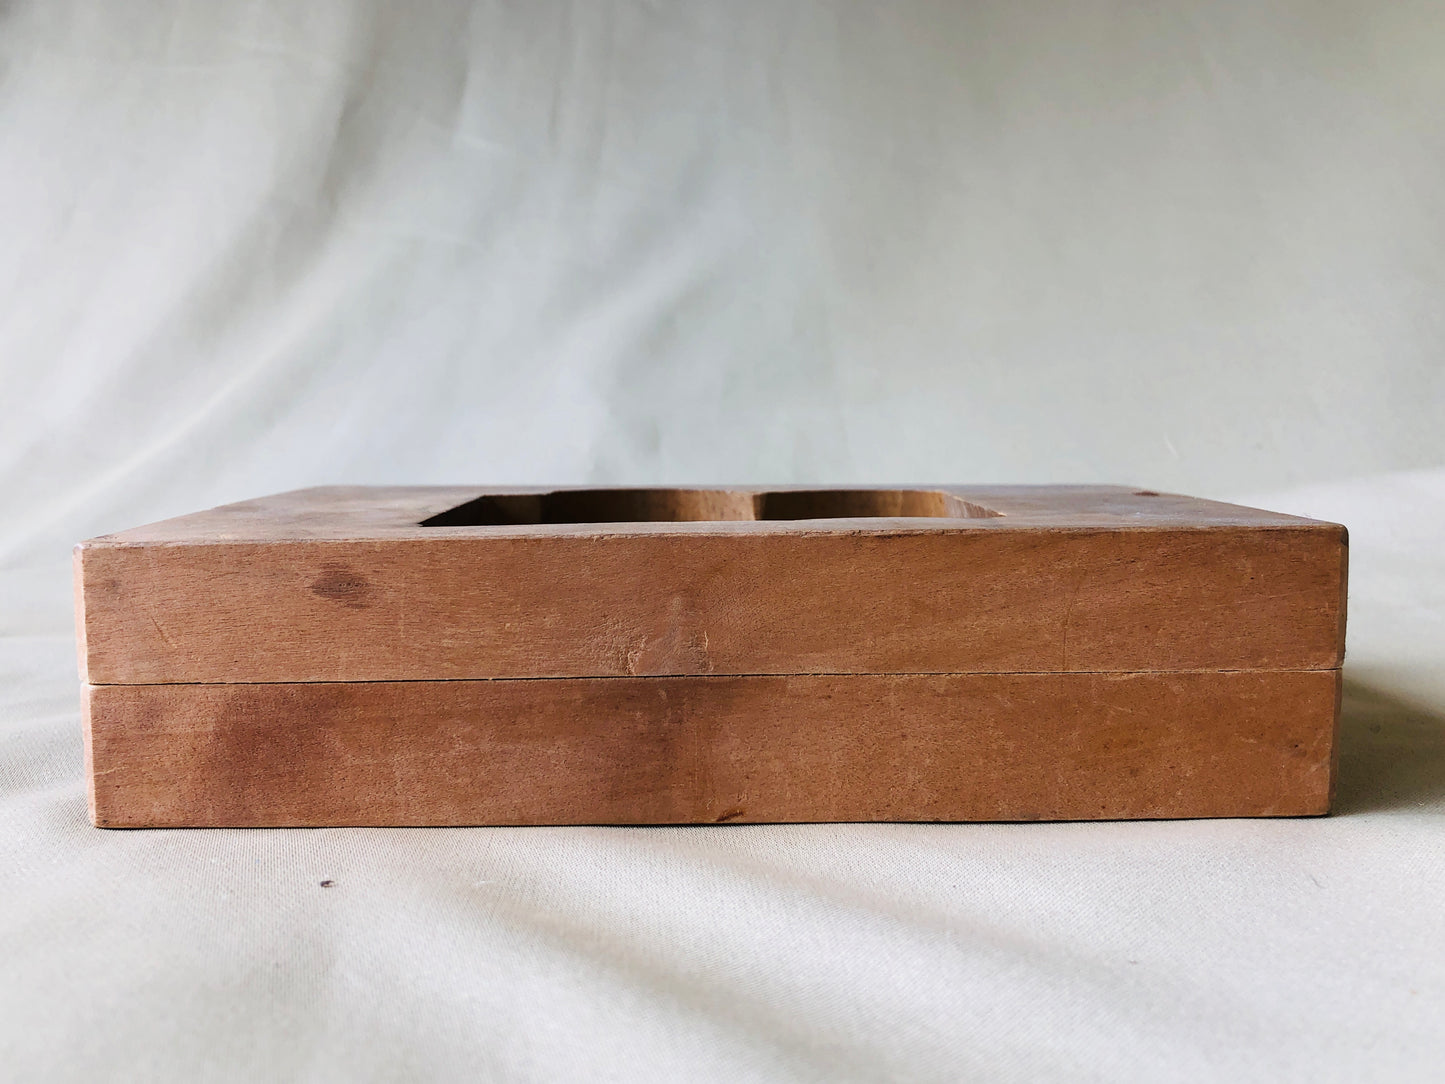 Y4230 KASHIGATA Book Japan antique Wooden Pastry Mold wagashi confectionery